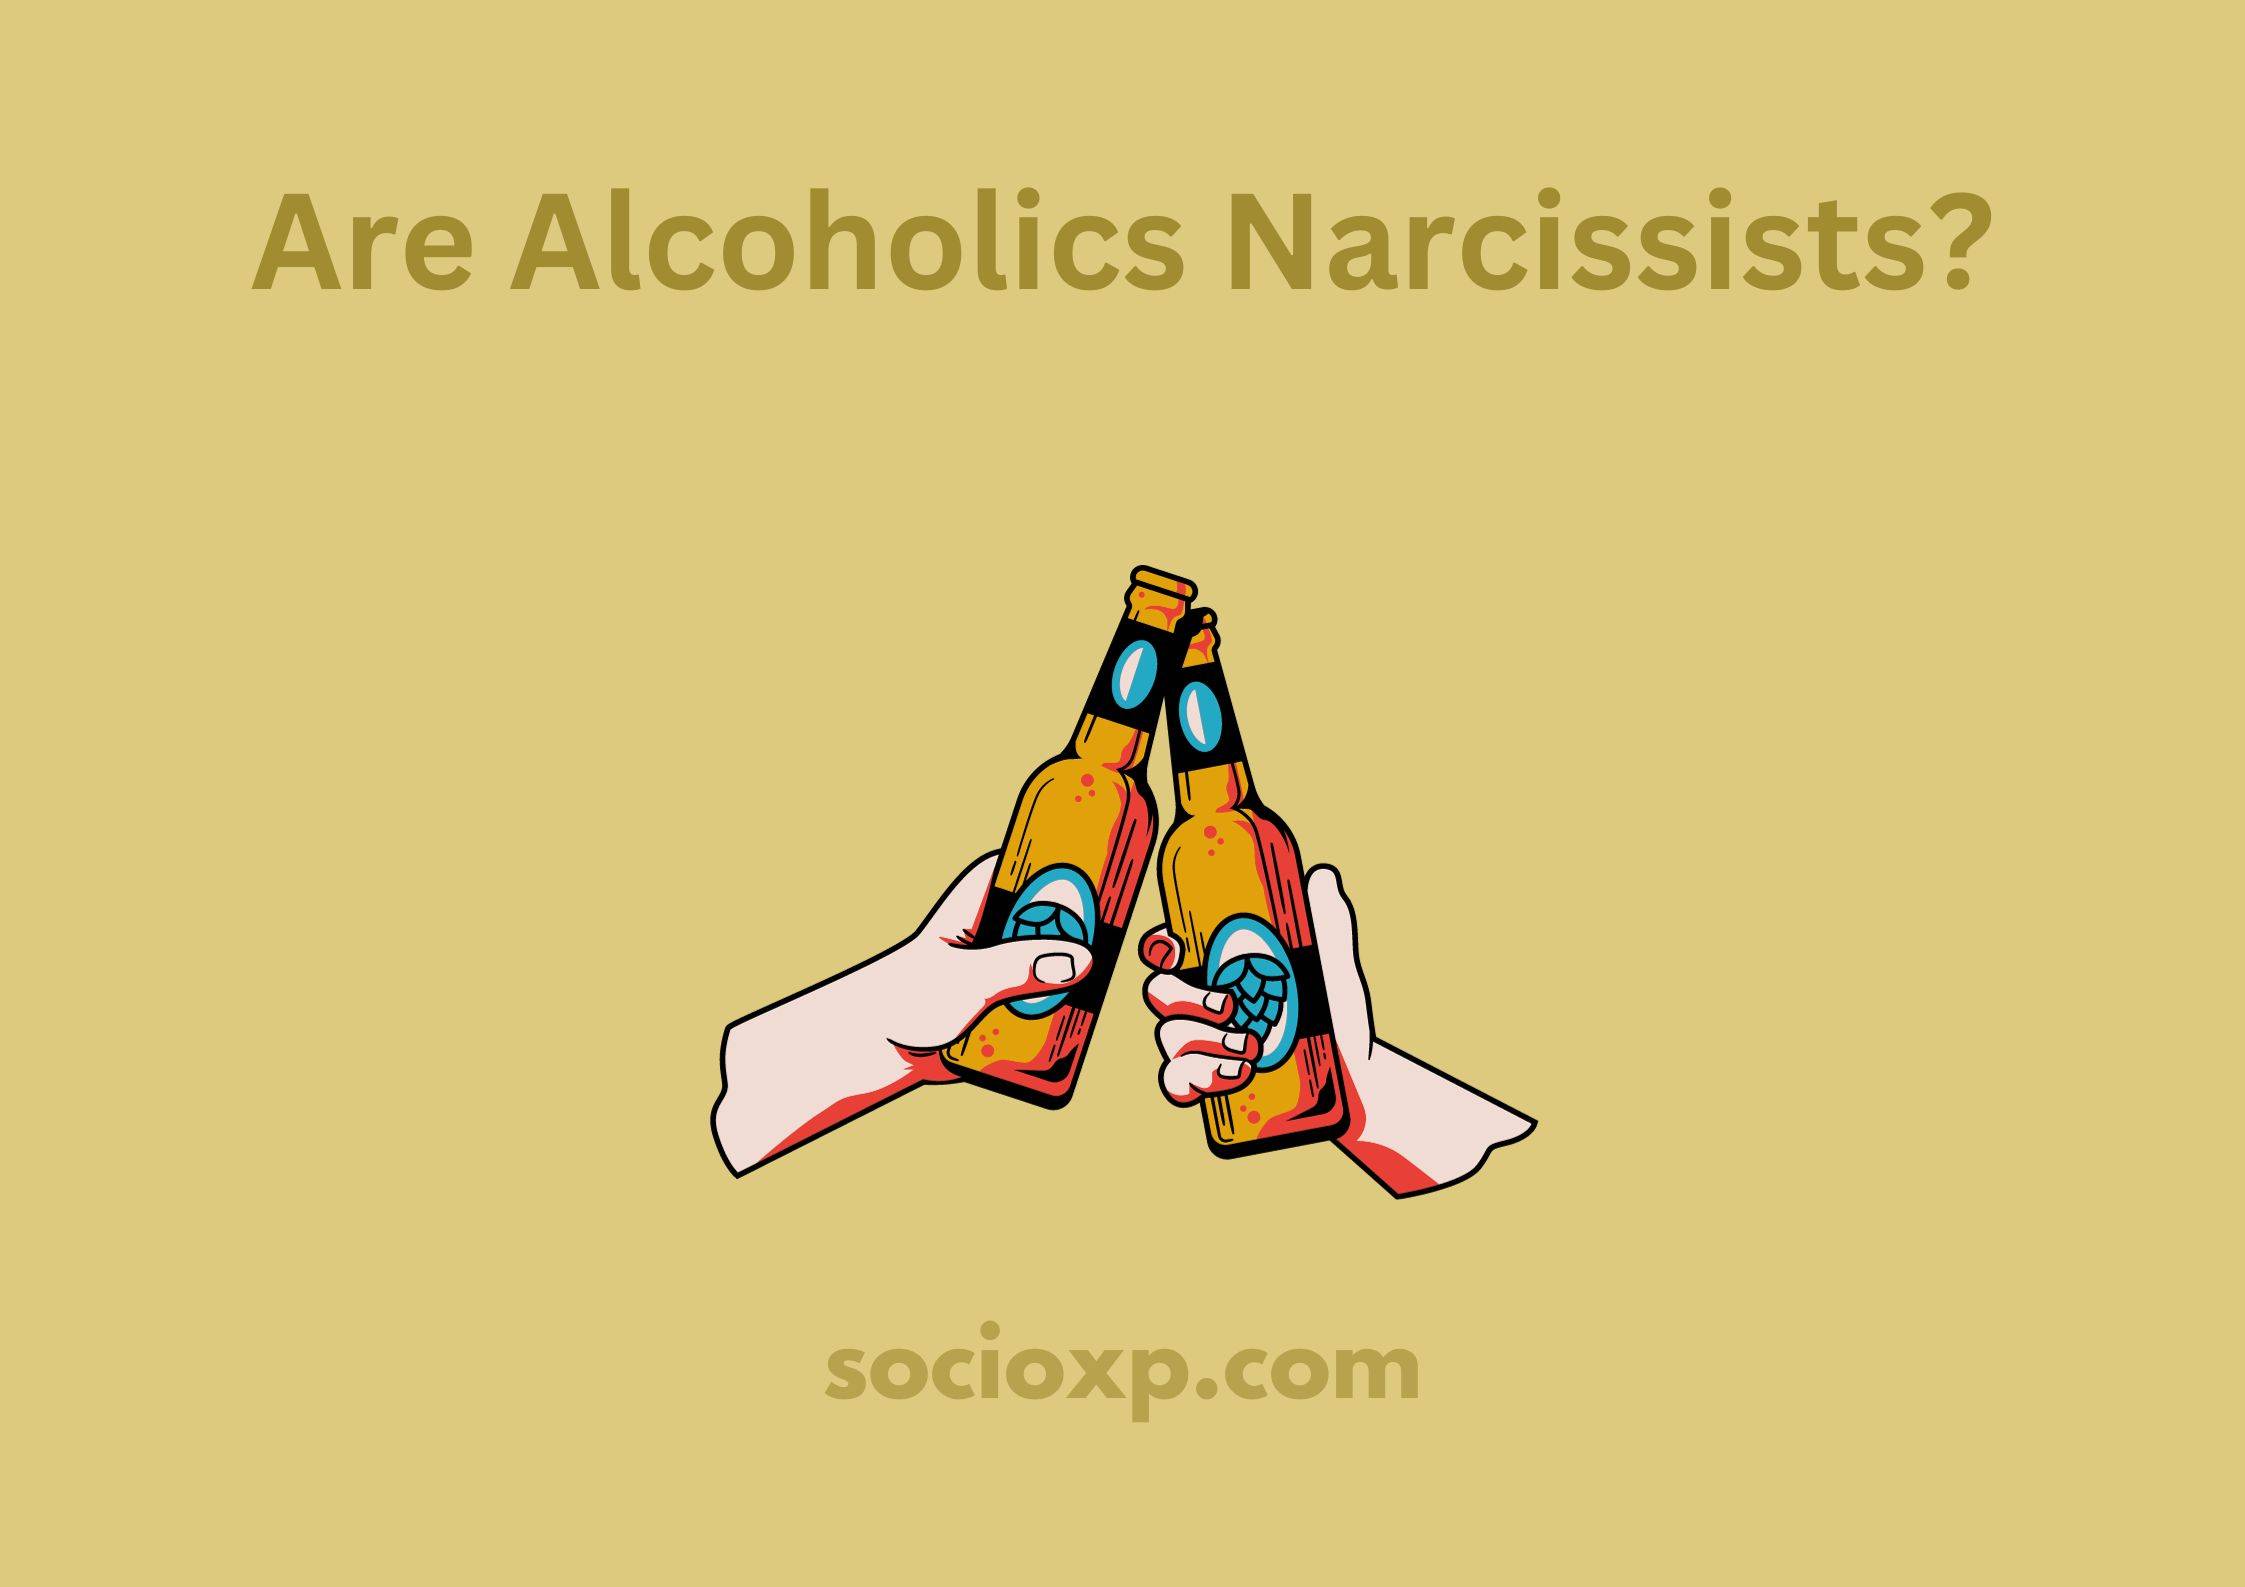 Are Alcoholics Narcissists?